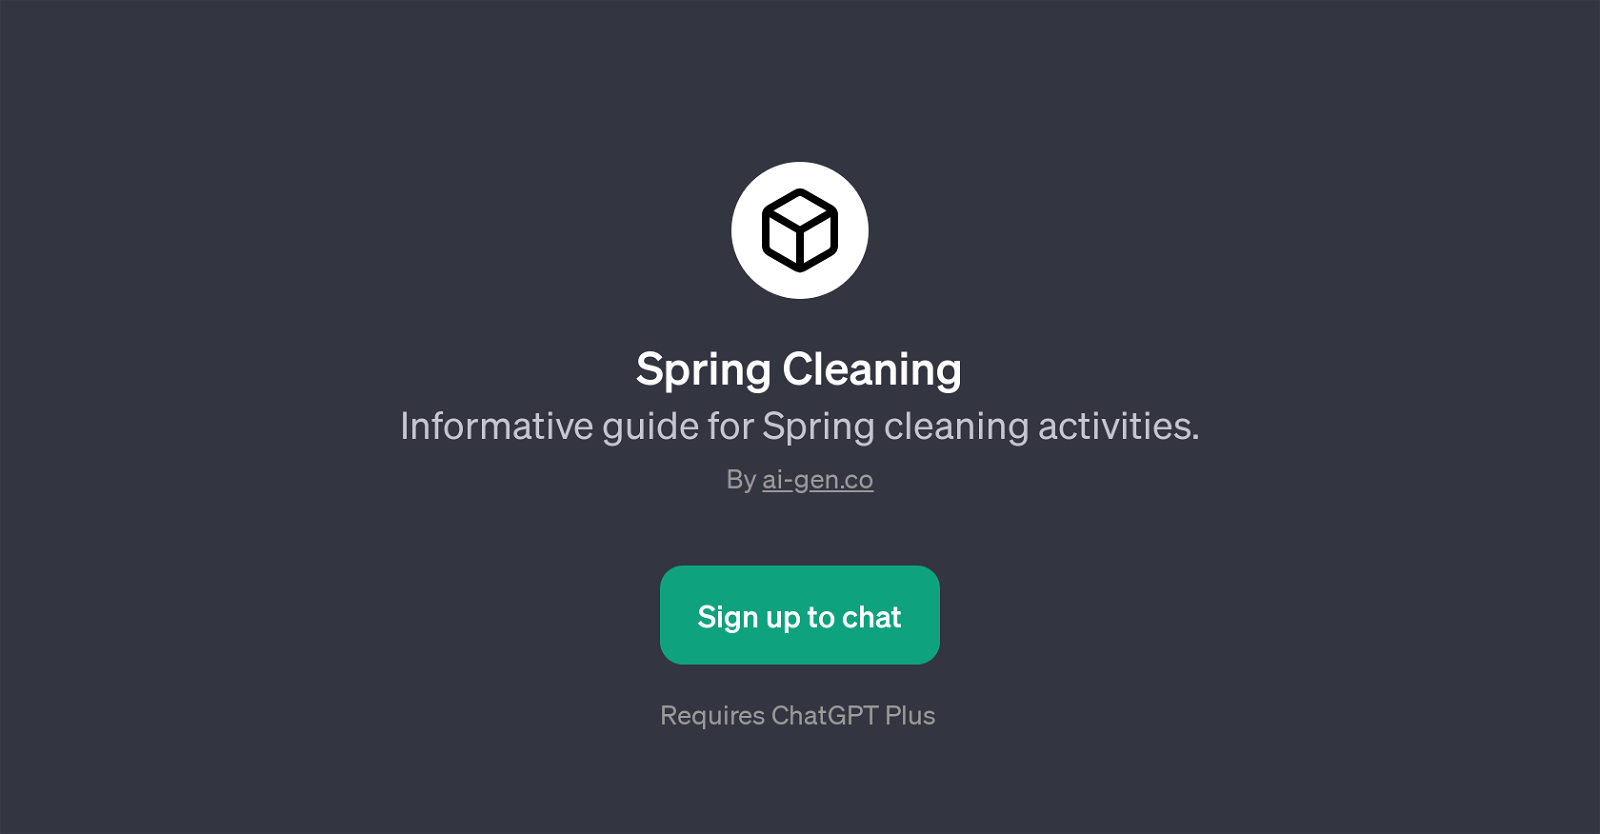 Spring Cleaning website